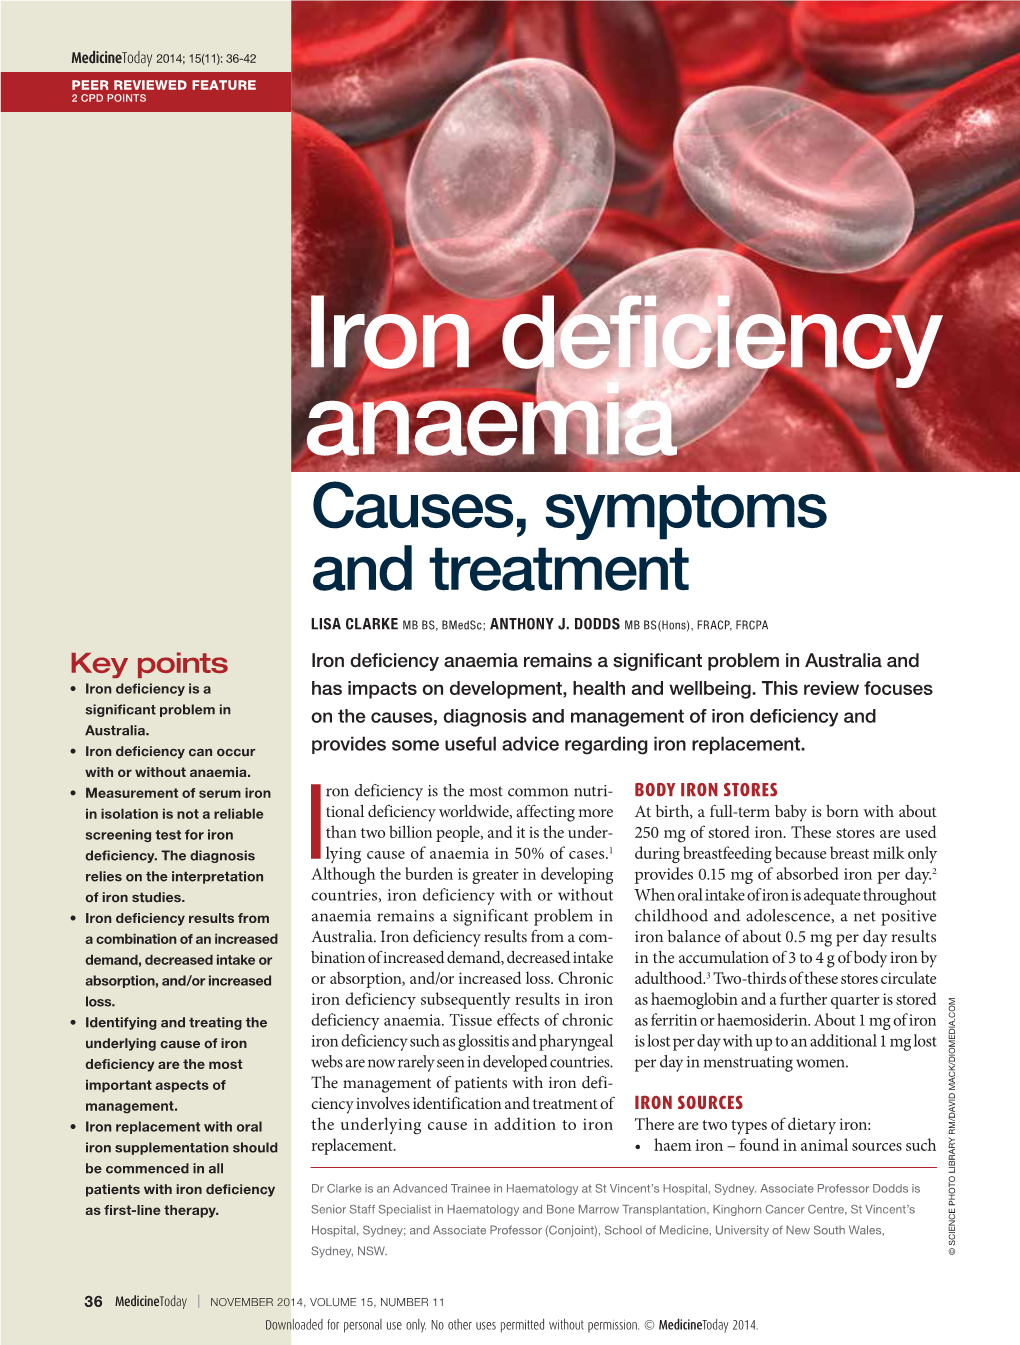 Iron Deficiency Anaemia. Causes, Symptoms and Treatment